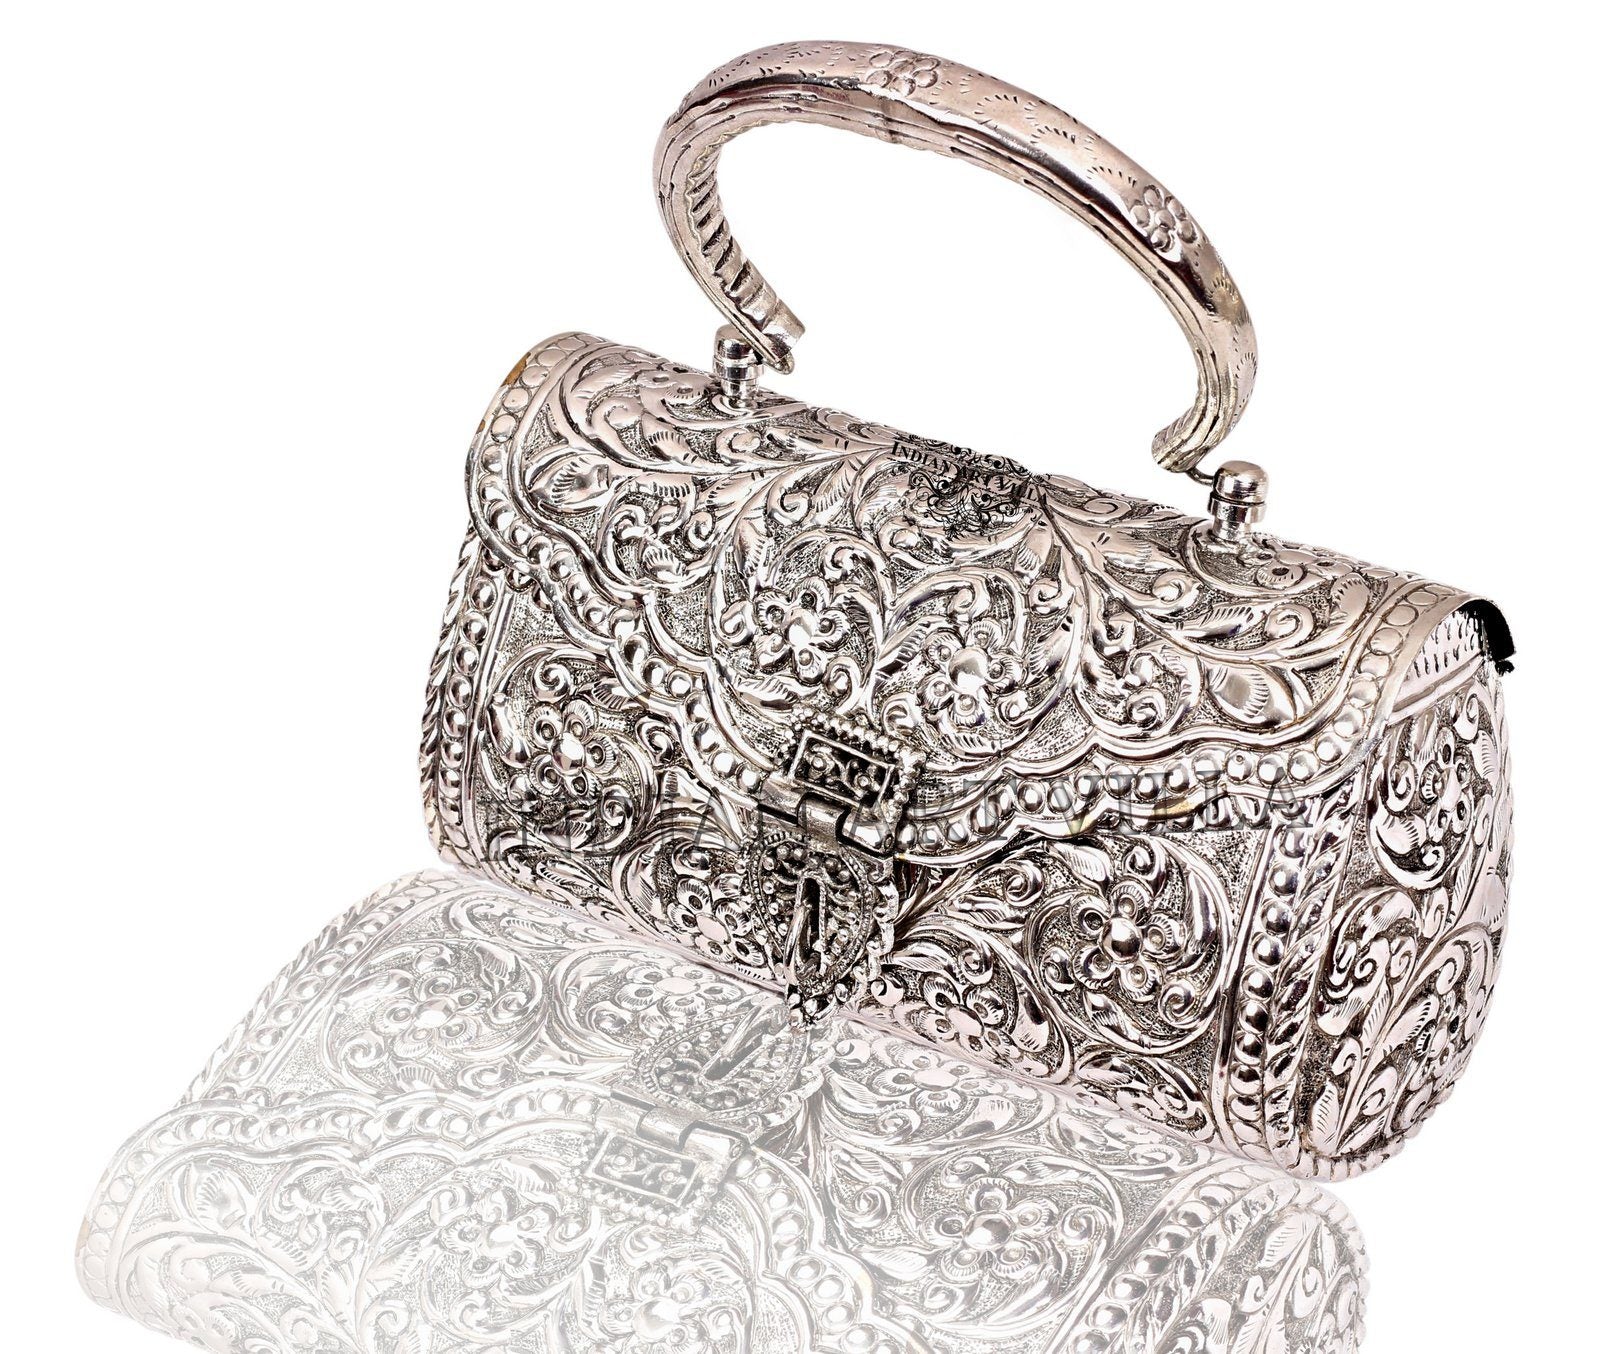 Indian pure handcrafted Antique silver Metal Clutch bag Party Sling handbag